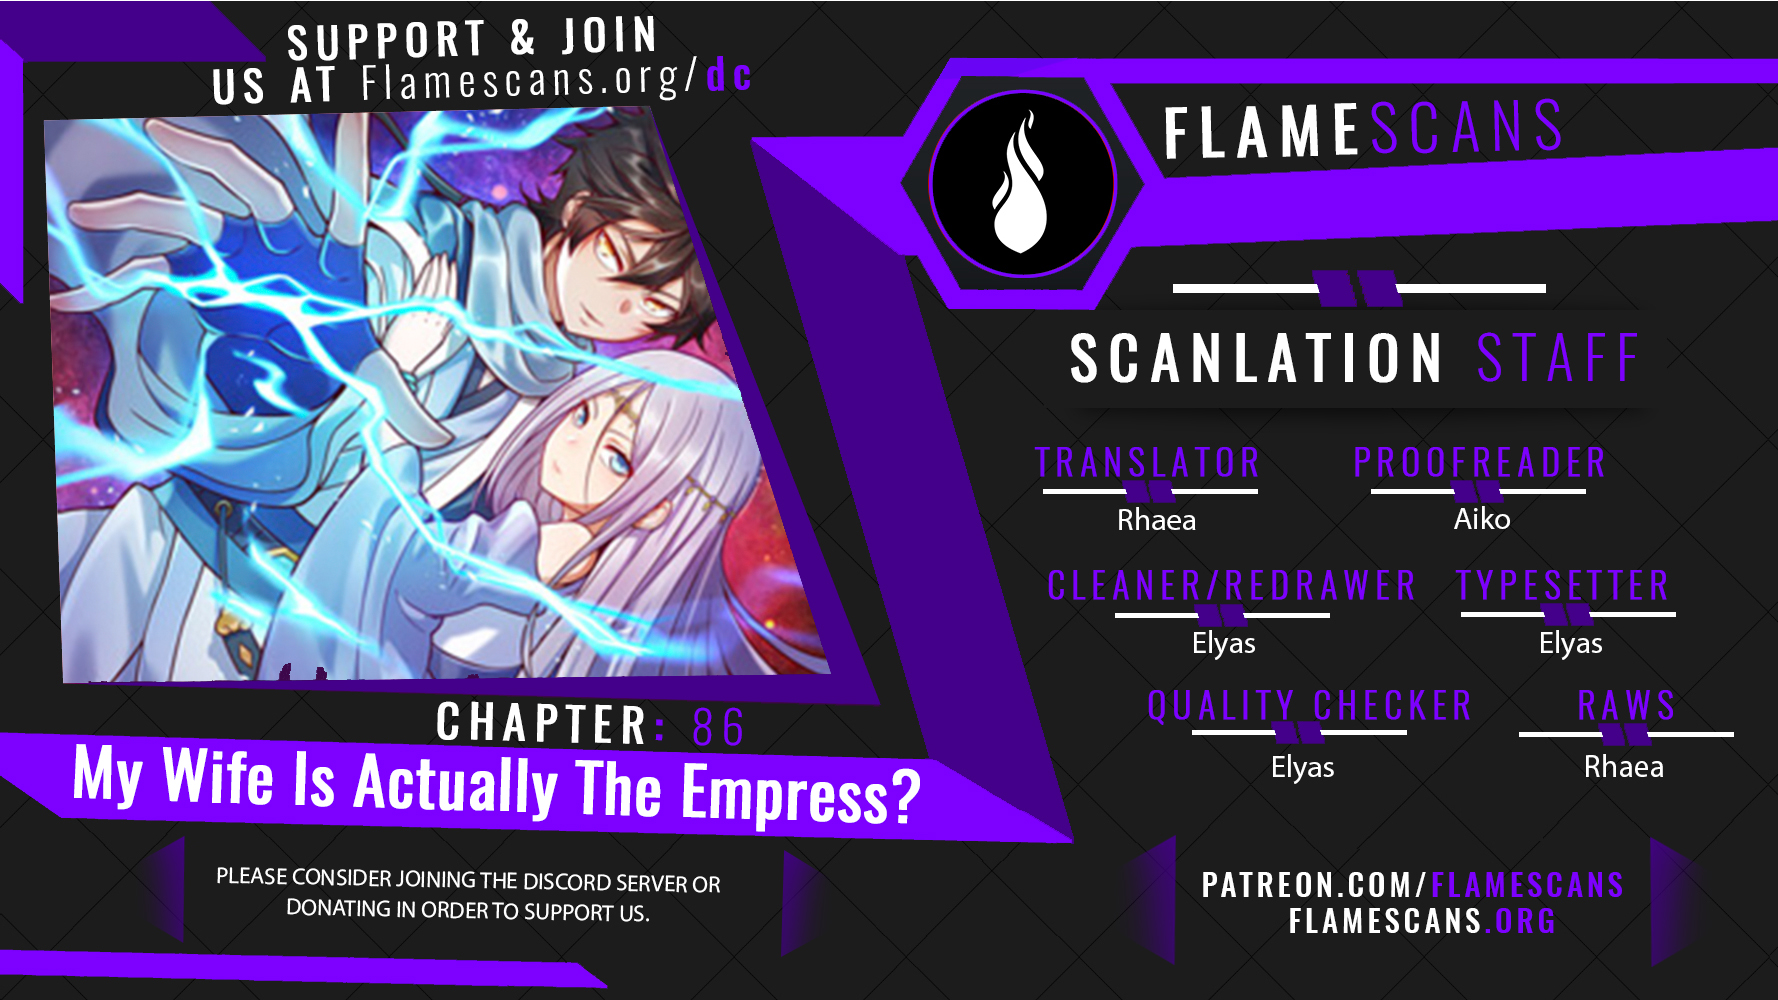 My Wife Is Actually The Empress? - Chapter 16062 - Image 1